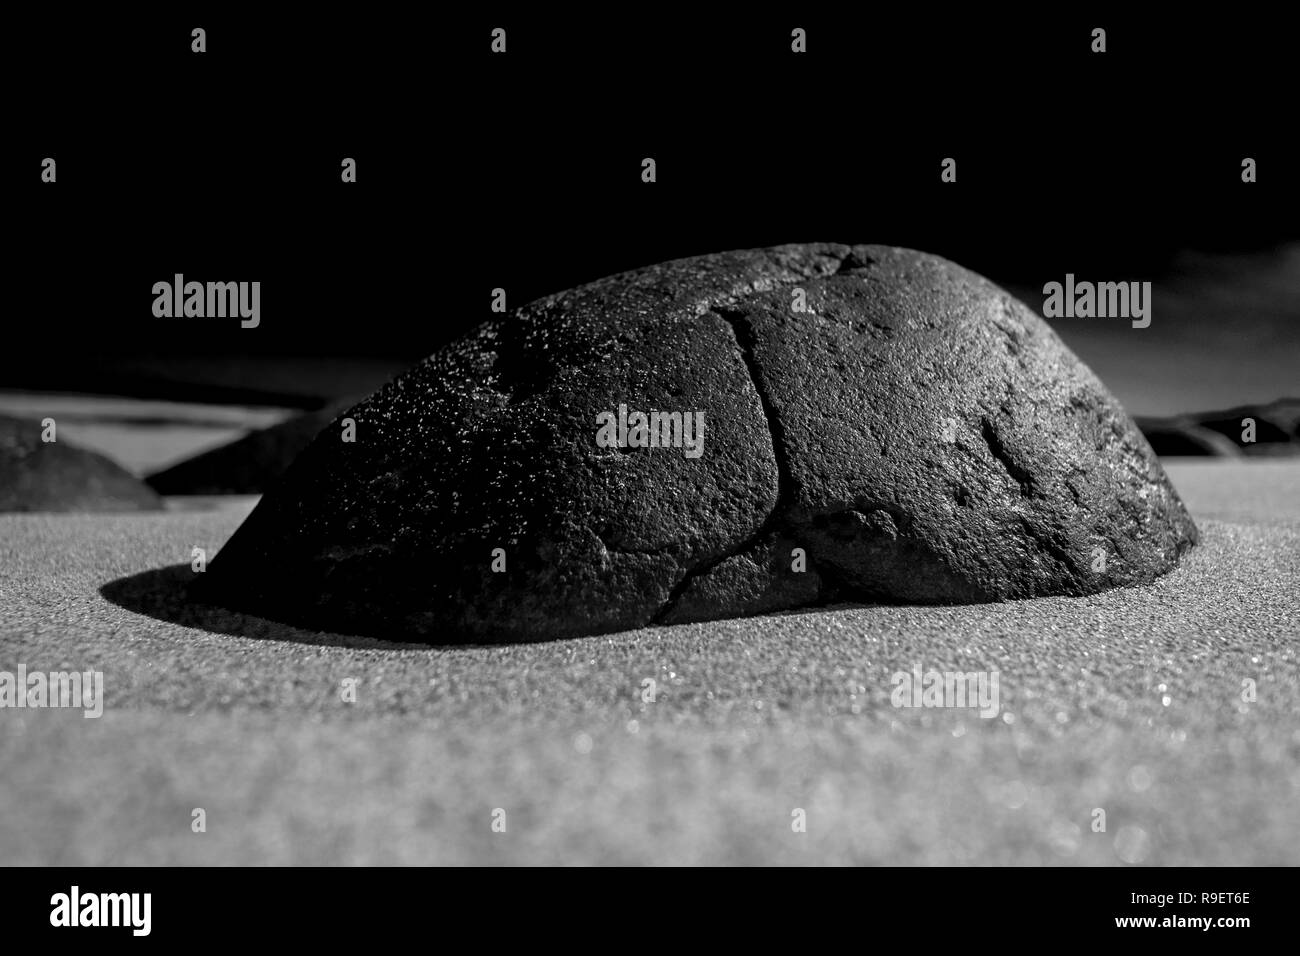 black and white picture of rocks from unusual angle Stock Photo